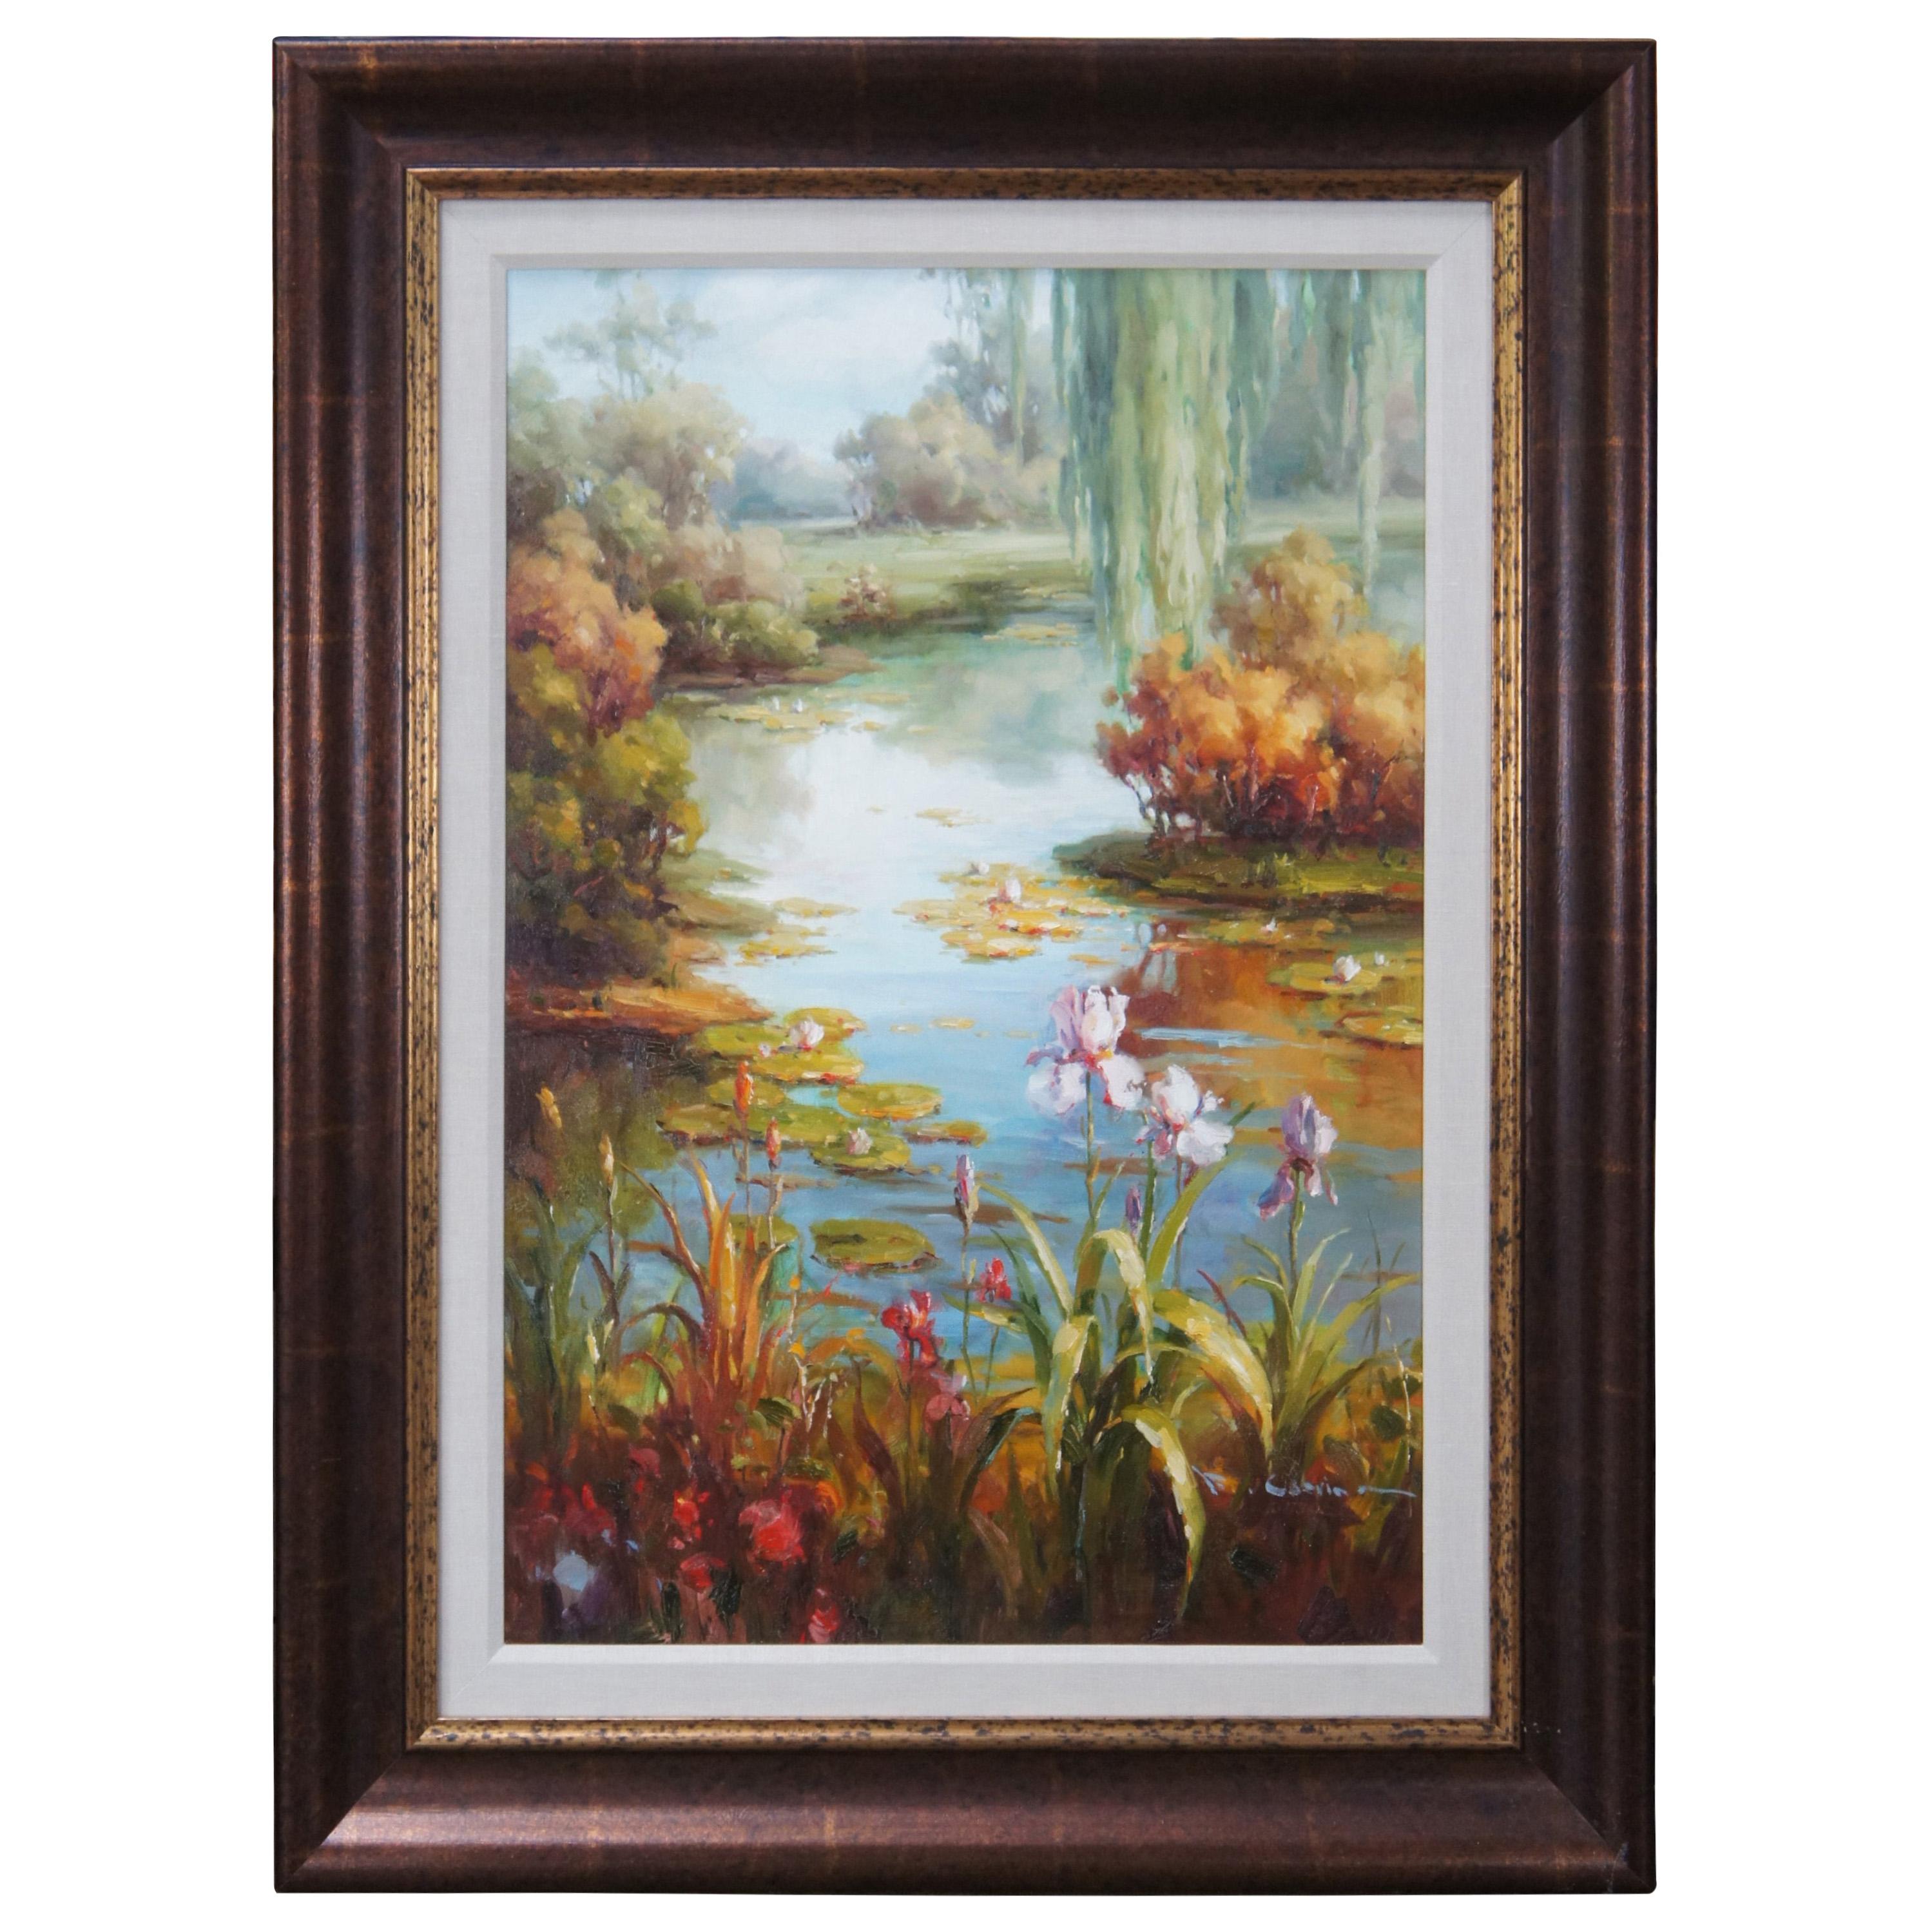 Original Oil Painting on Canvas Lake Scene Water Lily Floral Marsh Realism 47"